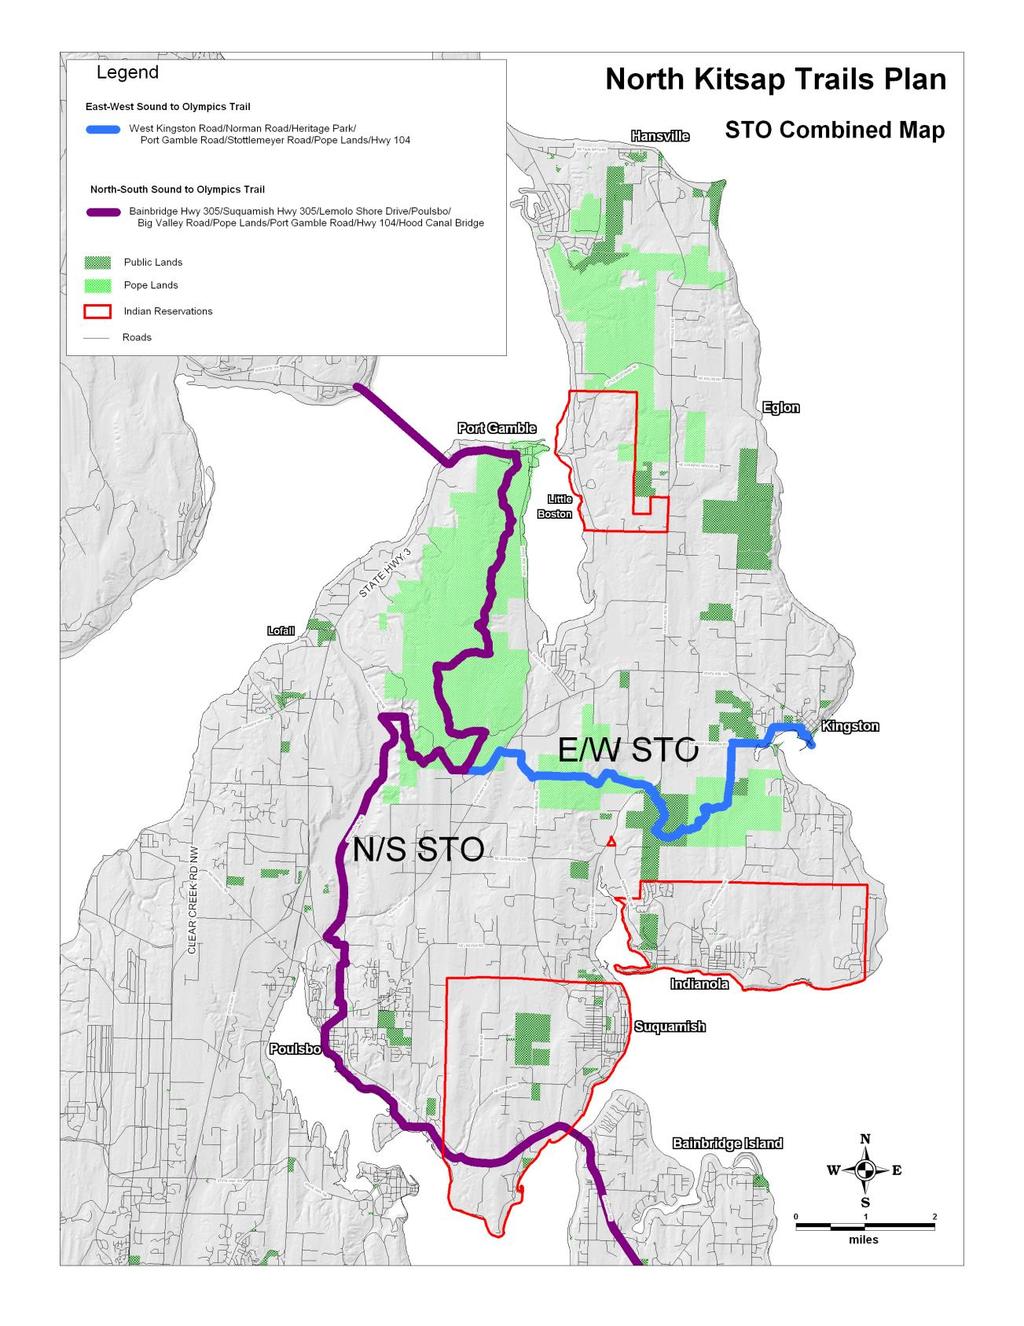 This regional trail (built to a "shared used path" standard) will connect the Burke-Gilman and other regional trails